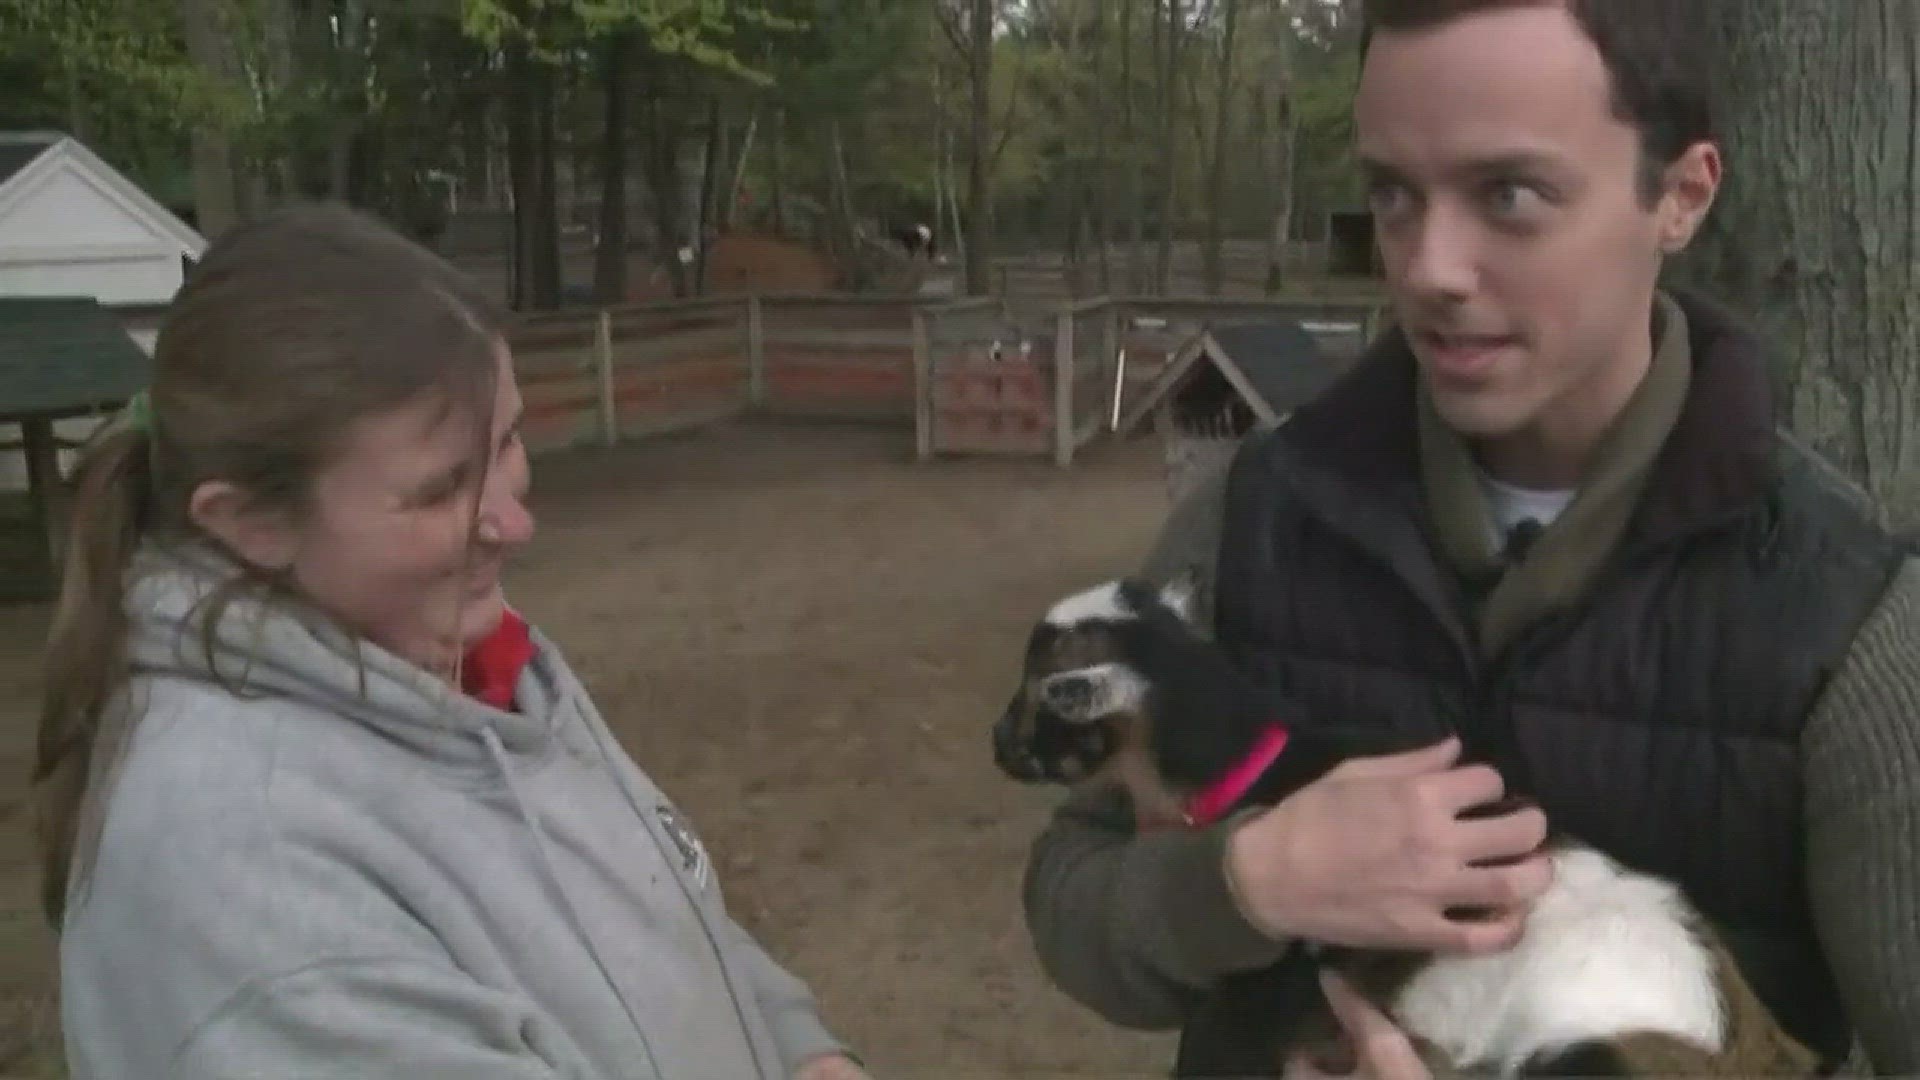 Friendship forms between NEWS CENTER's Cory Froomkin and a baby goat at Smiling Hill Farm in Westbrook